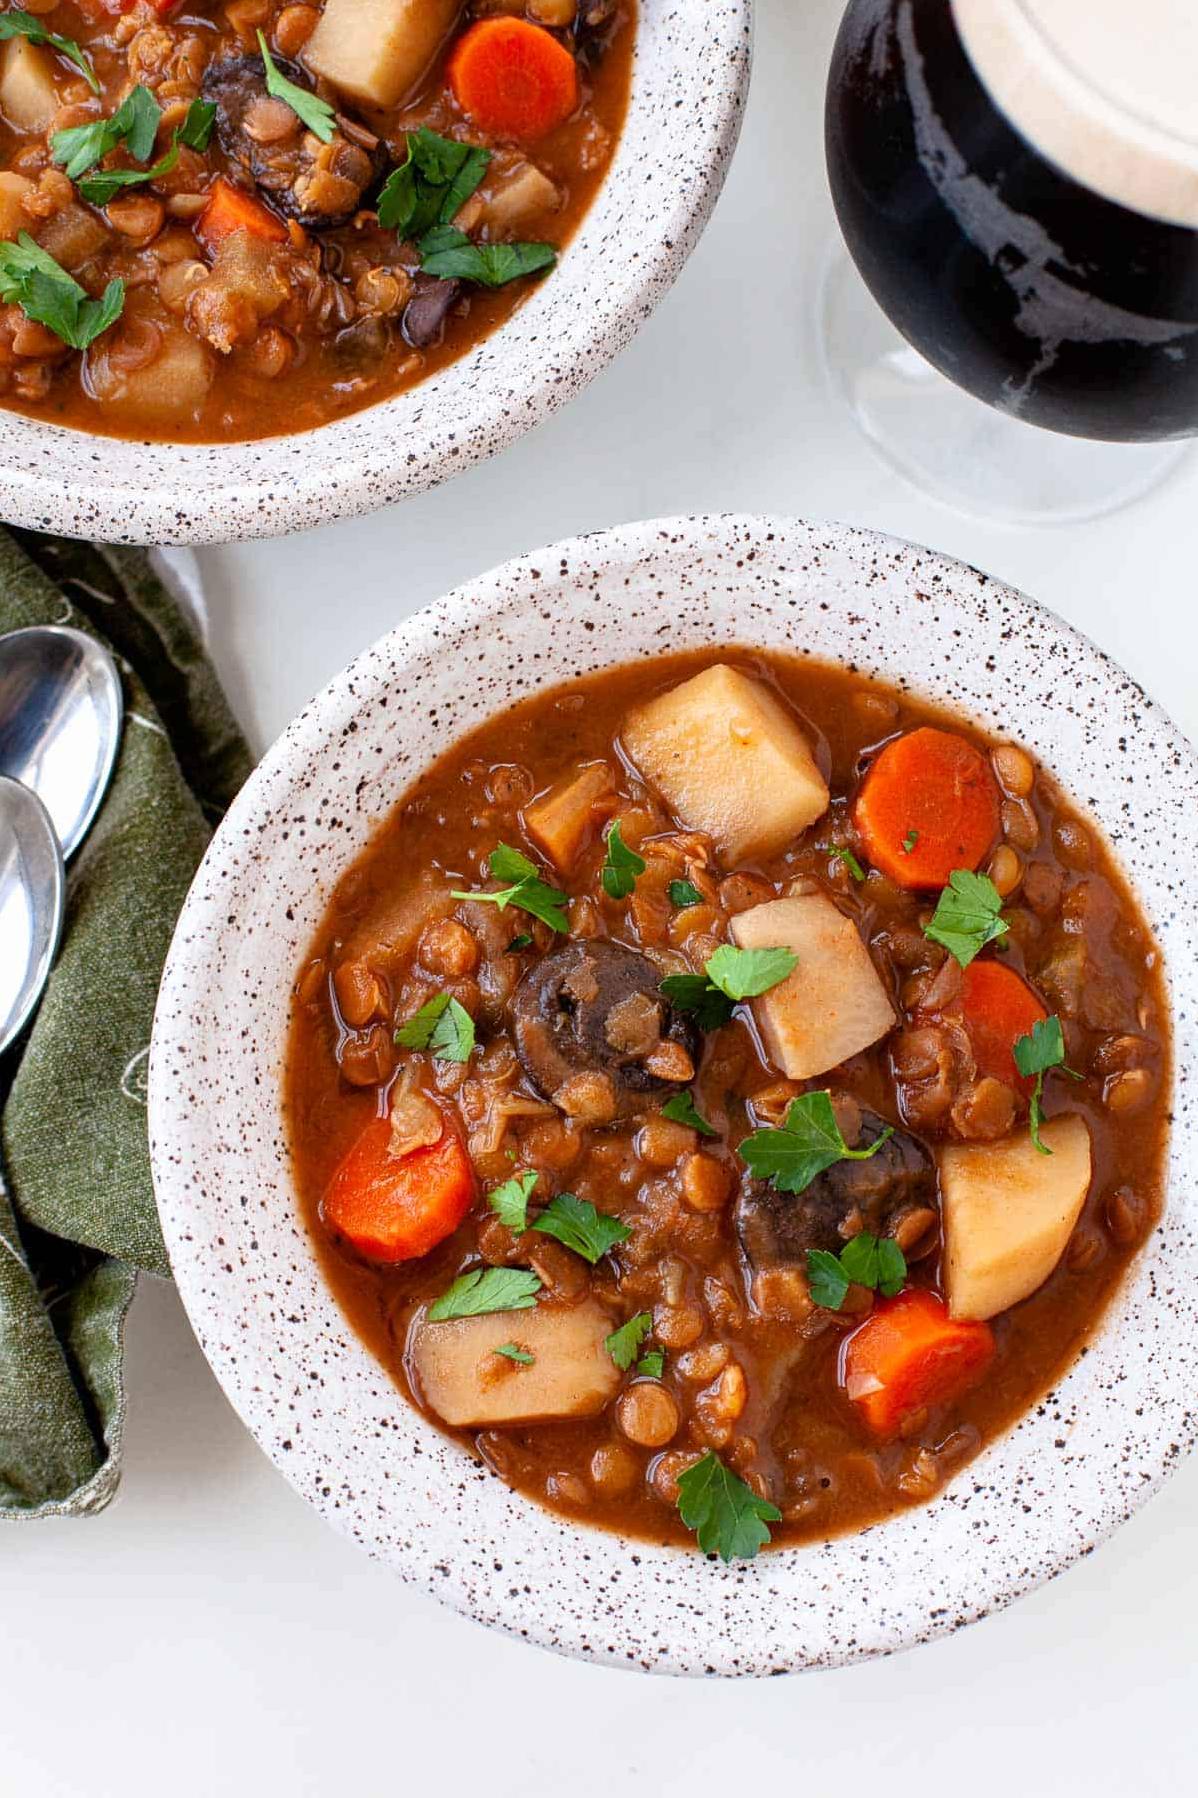 Flavorful Vegetarian Irish Stew: A Hearty Bowl of Comfort